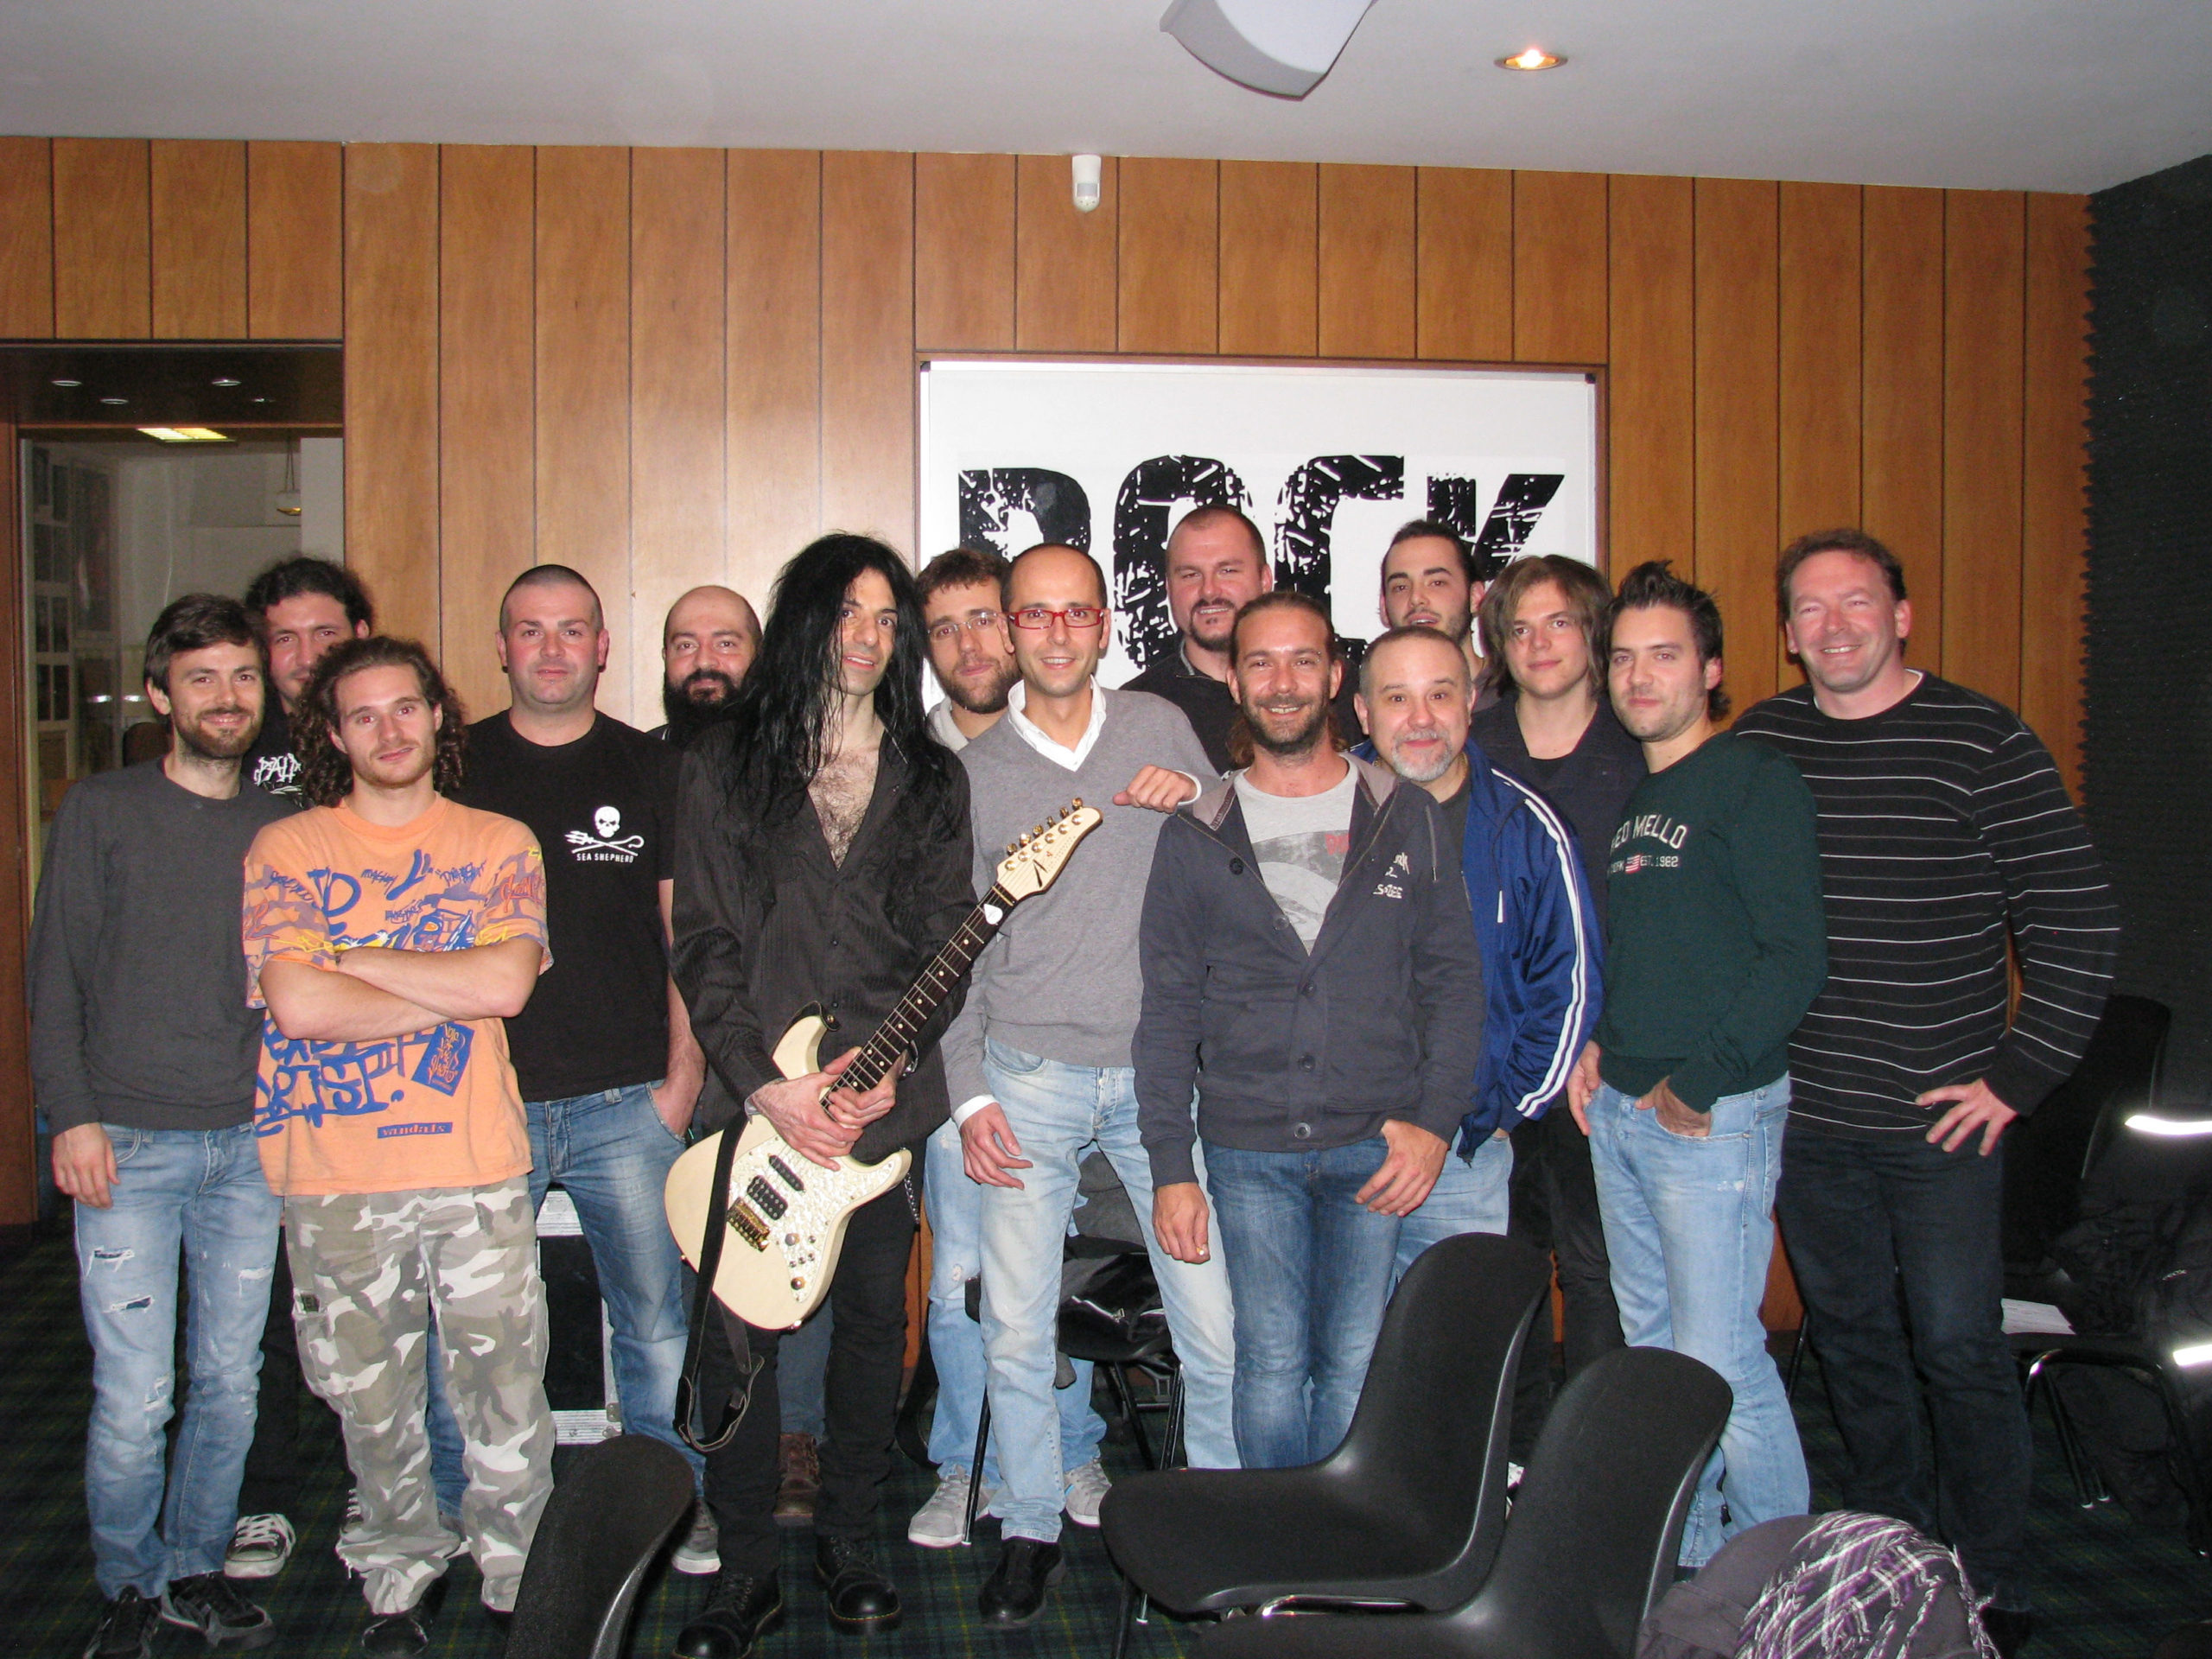 Mike Campese - Guitar Clinic in Treviso, Italy. Pic 17 - Group Pic.